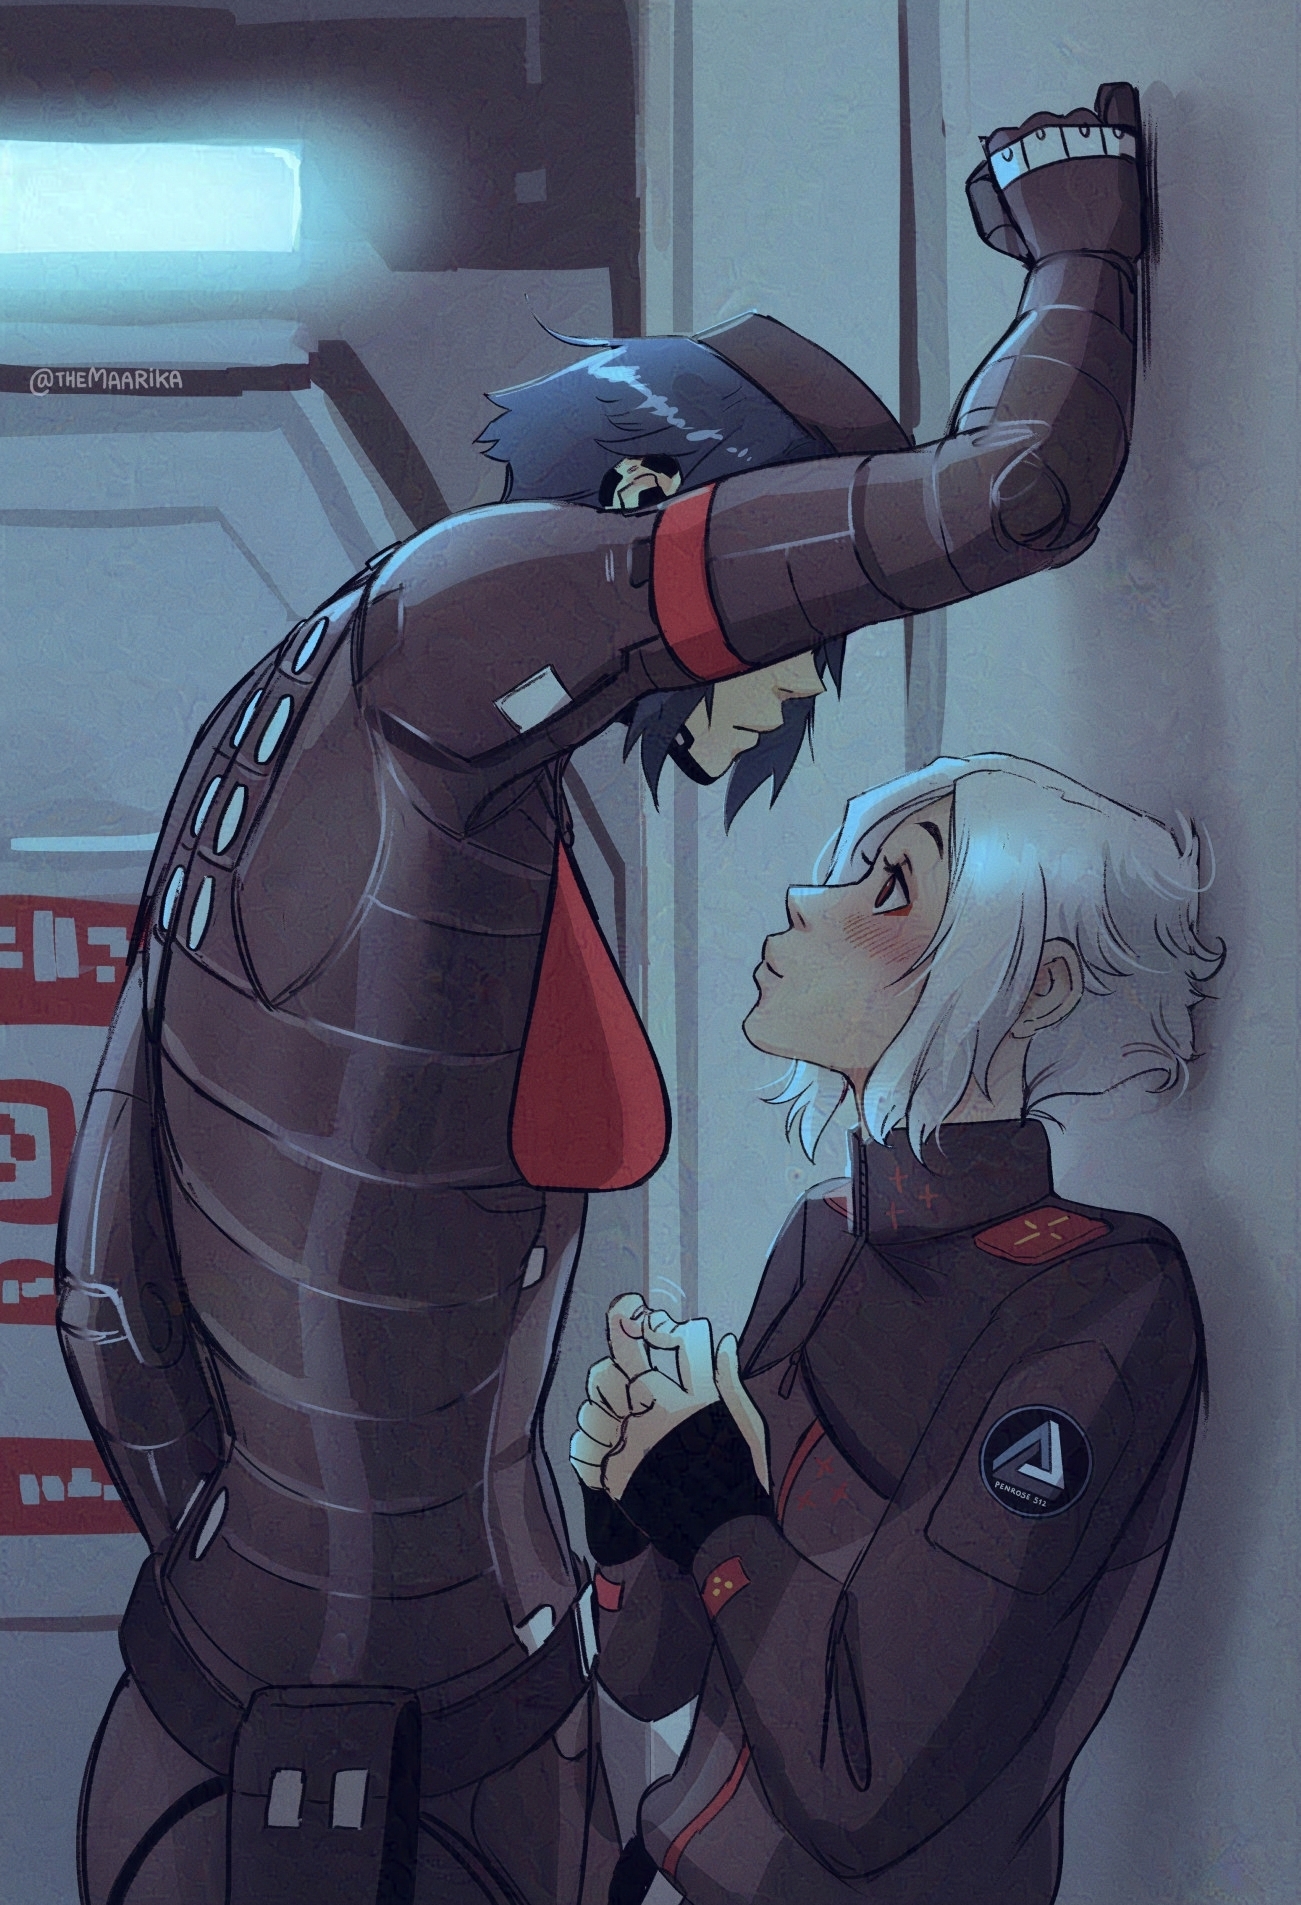 Fanart of Signalis depicting Ariane and Elster who are yuri couple. Elster is an android, she is leaning on the wall with one arm and looking down at Ariane. Her face is obscured by her arm. Ariane is a woman with short white hair and she is shorter than Elster. She is looking up at Elster and blushing.